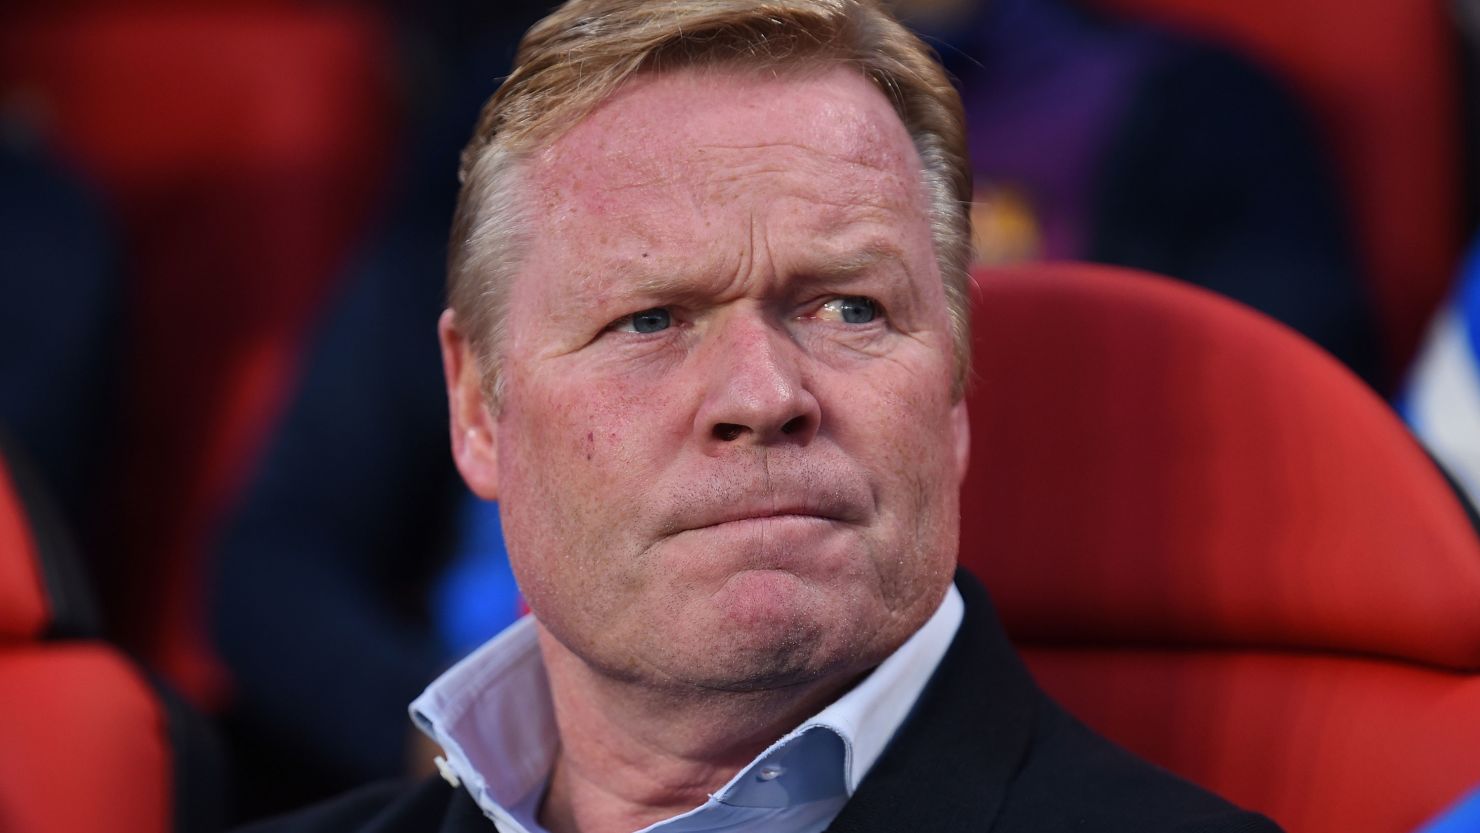 FC Barcelona coach Ronald Koeman looks on before Wednesday's match against Rayo Vallecano in Madrid, Spain. Barcelona lost, and Koeman was fired after the game.